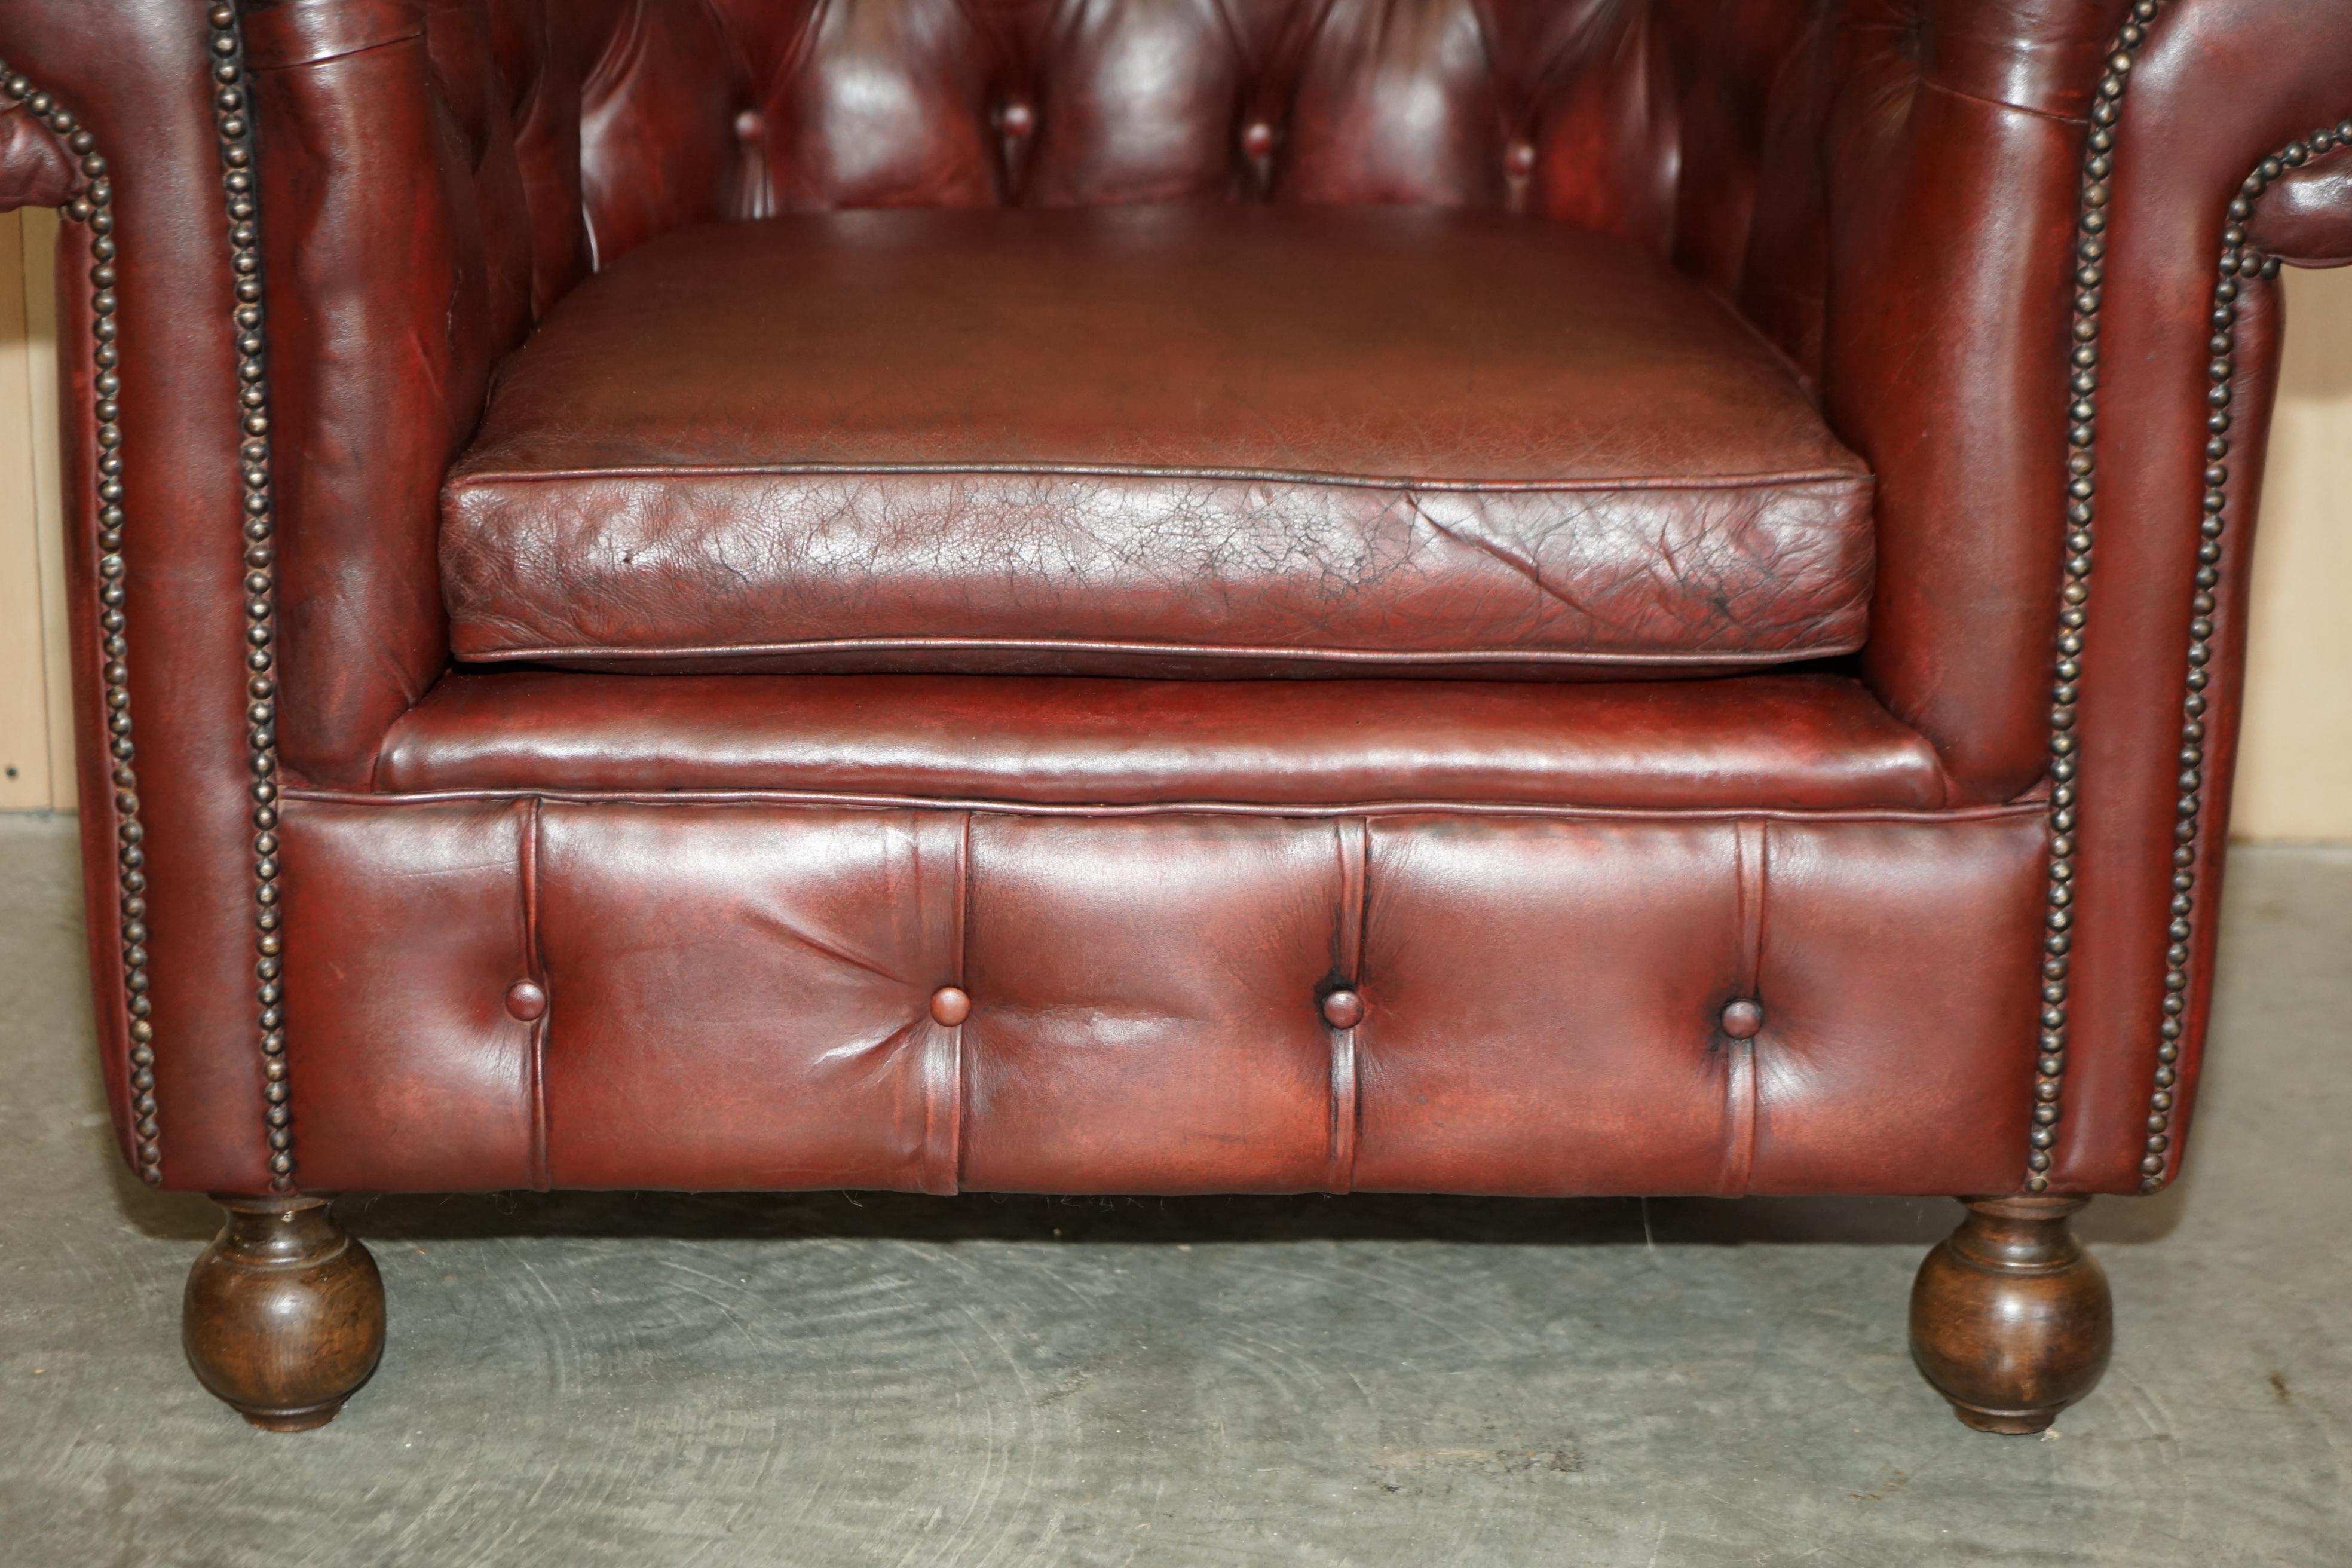 PAIR OF LOVELY ANTIQUE OXBLOOD LEATHER CHESTERFIELD GENTLEMAN'S CLUB ARMCHAiRS For Sale 5